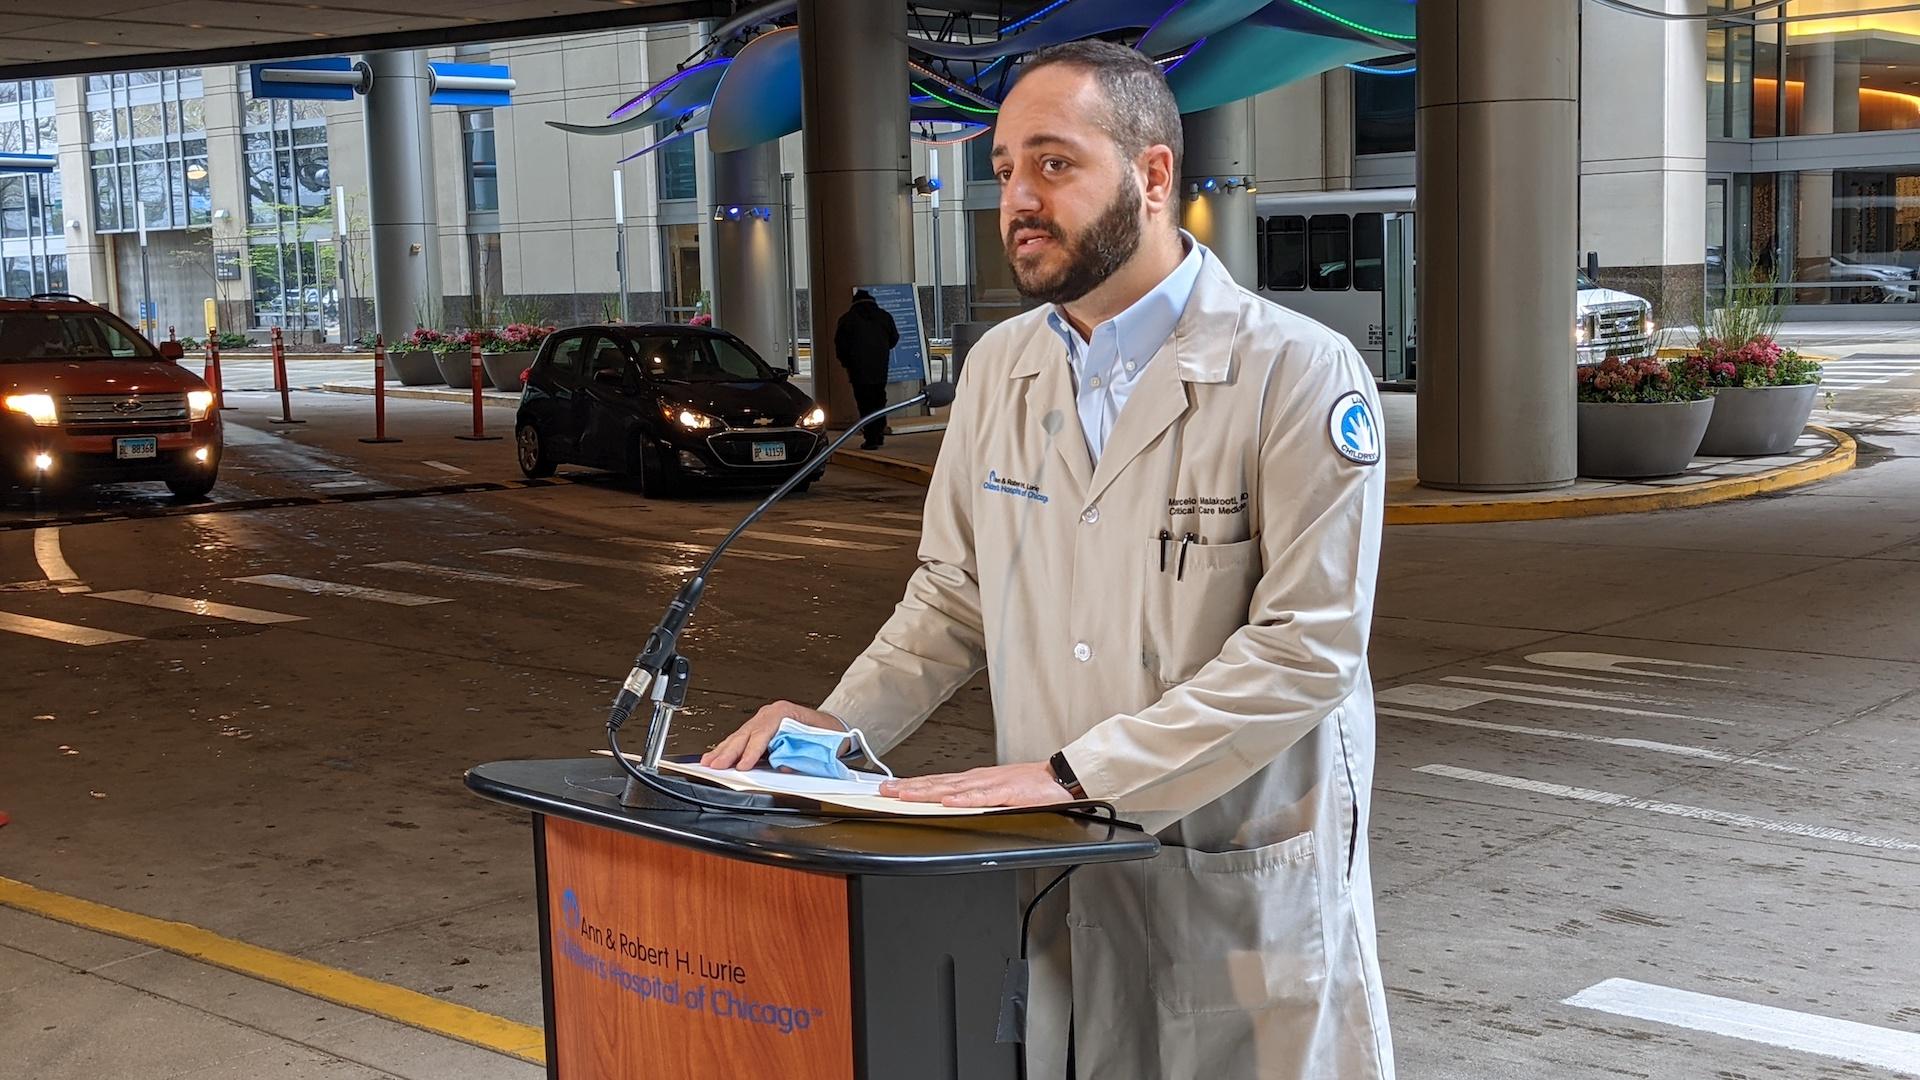 Dr. Marcelo Malakooti, medical director at Lurie Children’s Hospital, provides an update to reporters on Monday, April 19 outside the hospital on the condition of 22-month-old Kayden Swann, who was shot April 6. (Matt Masterson / WTTW News)